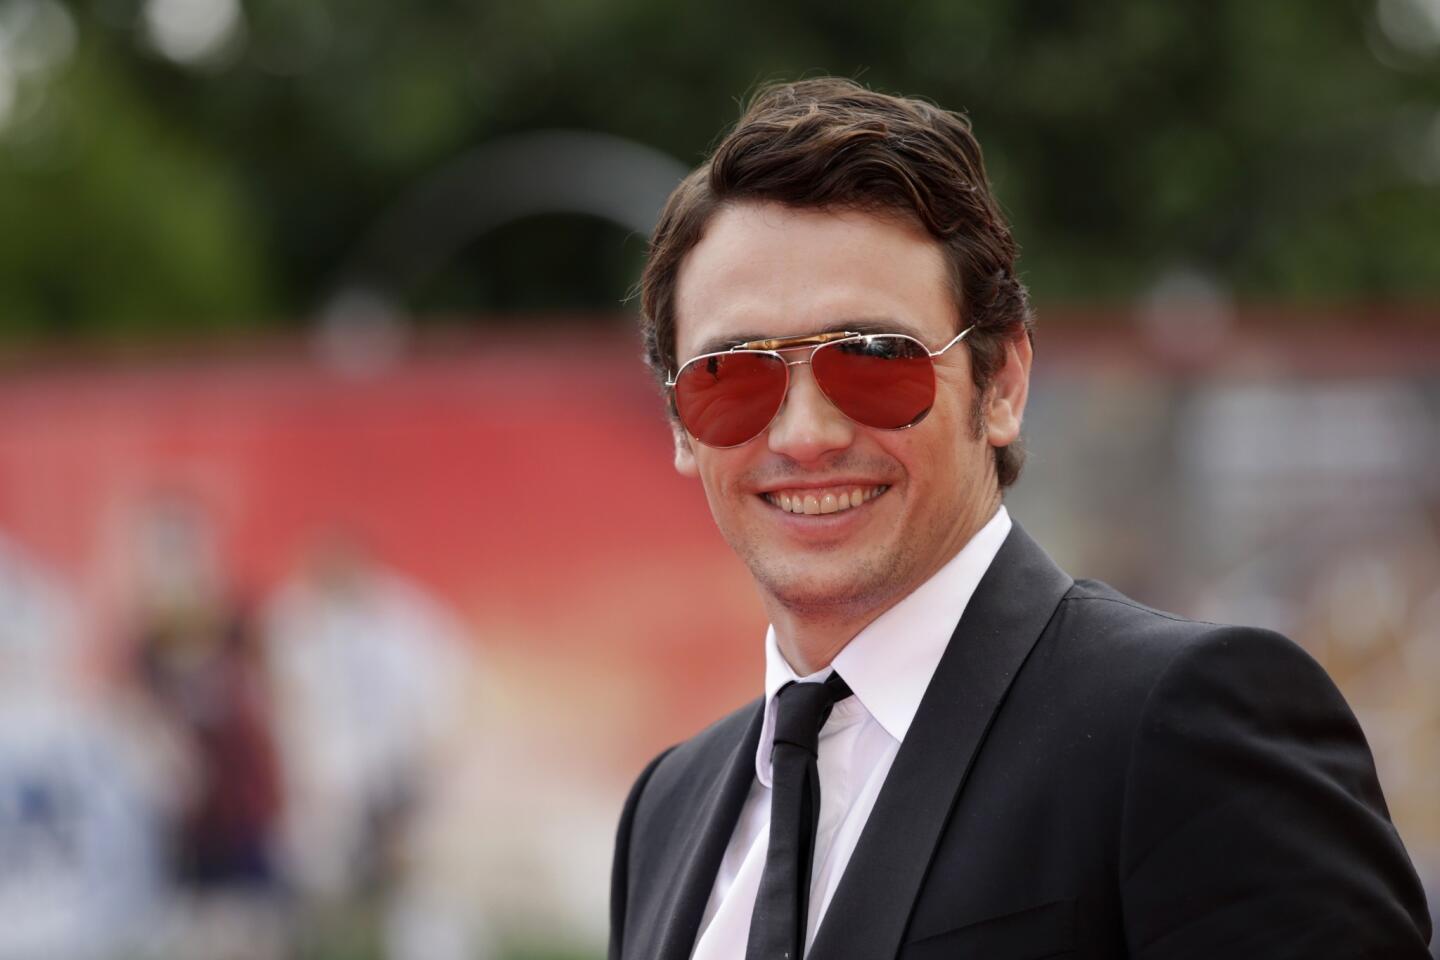 James Franco appeals for supporting actor Oscar nod with raunchy campaign